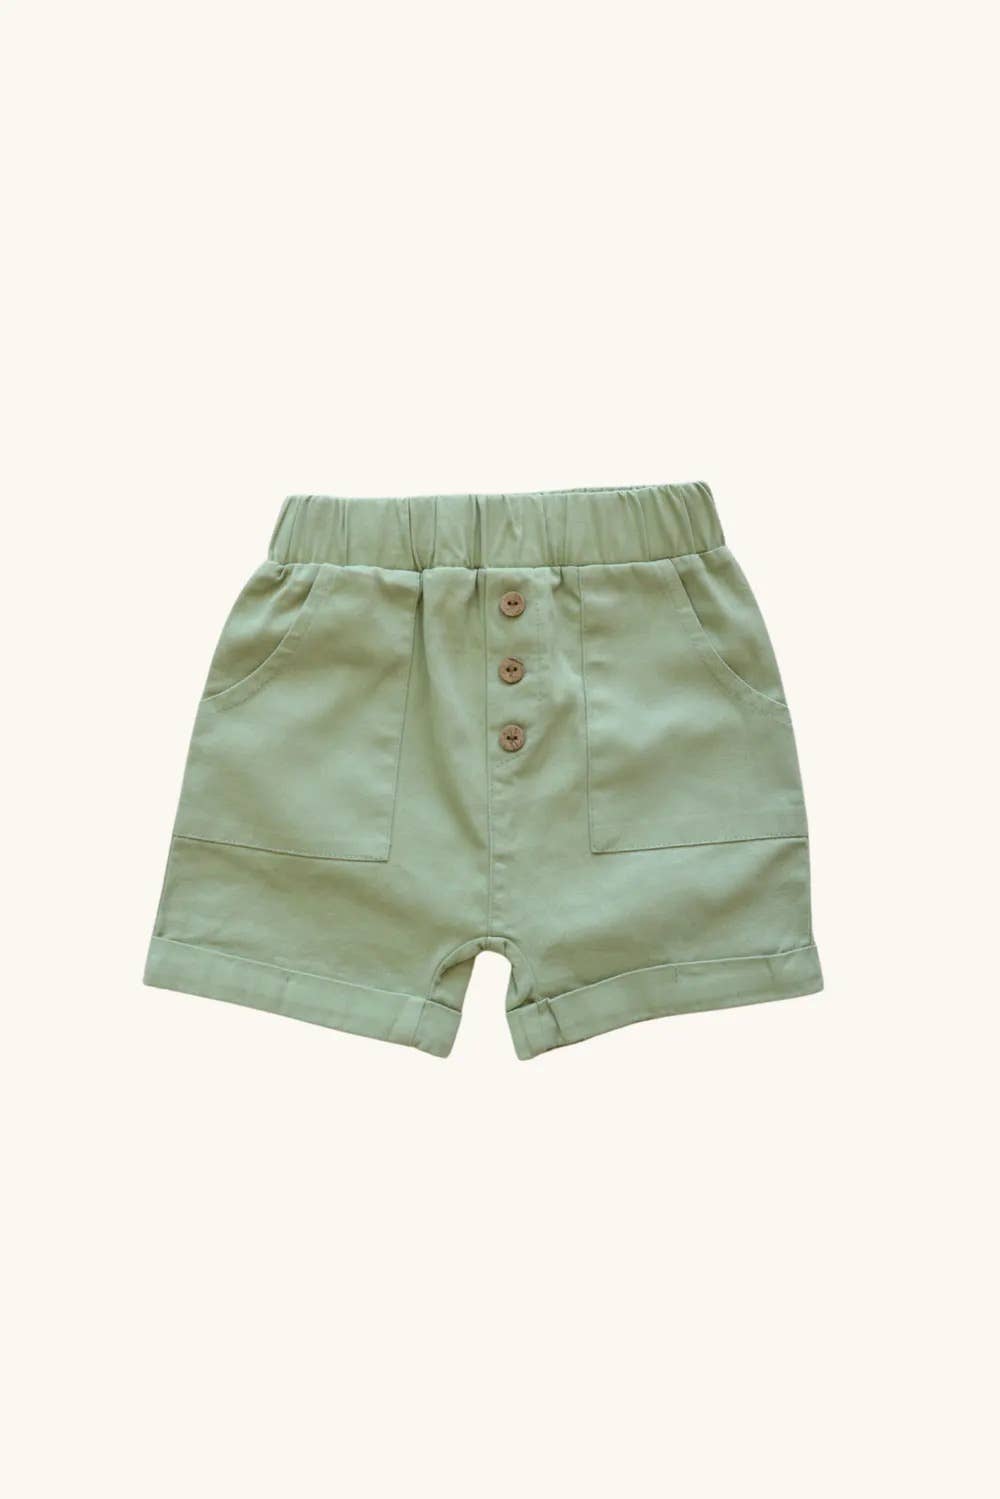 100% cotton Baby Shorts with Bamboo Buttons